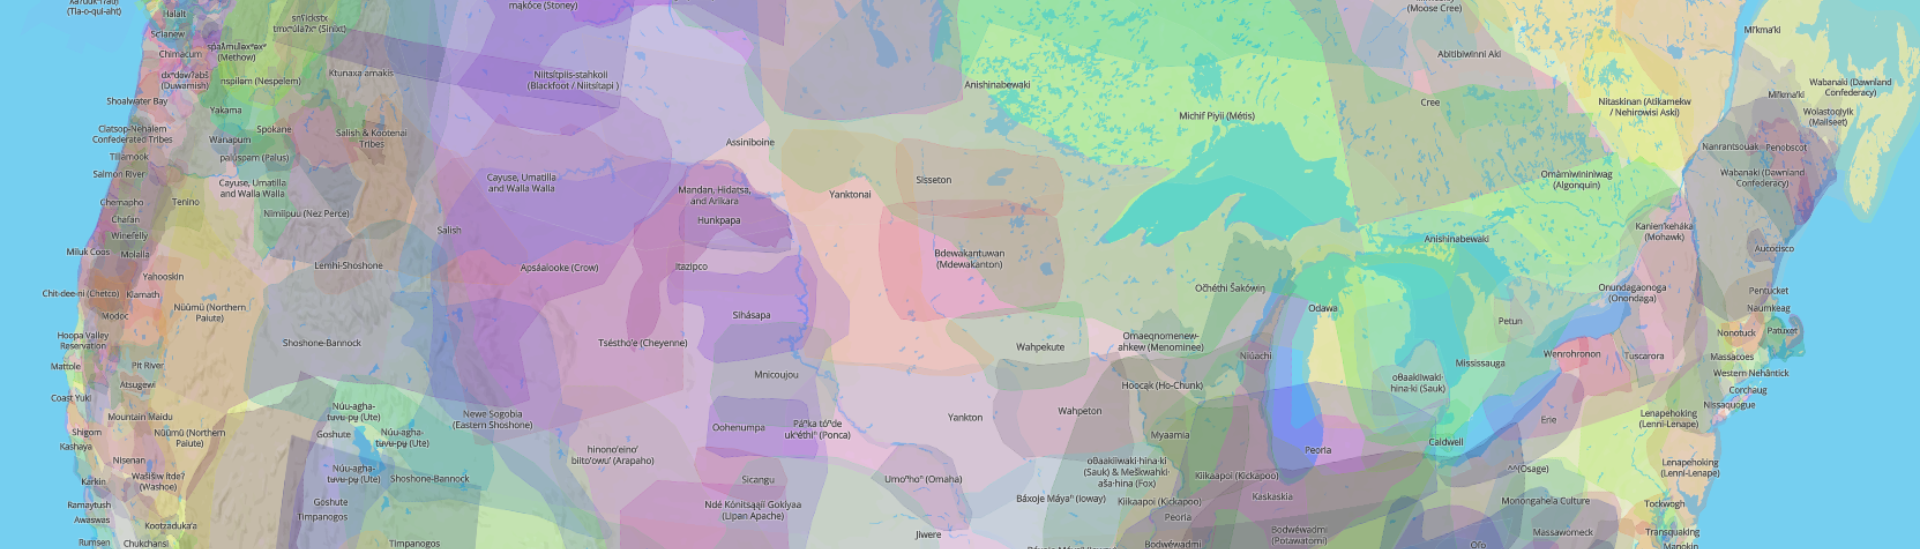 Map of Indigenous territories, treaties, and languages in Canada